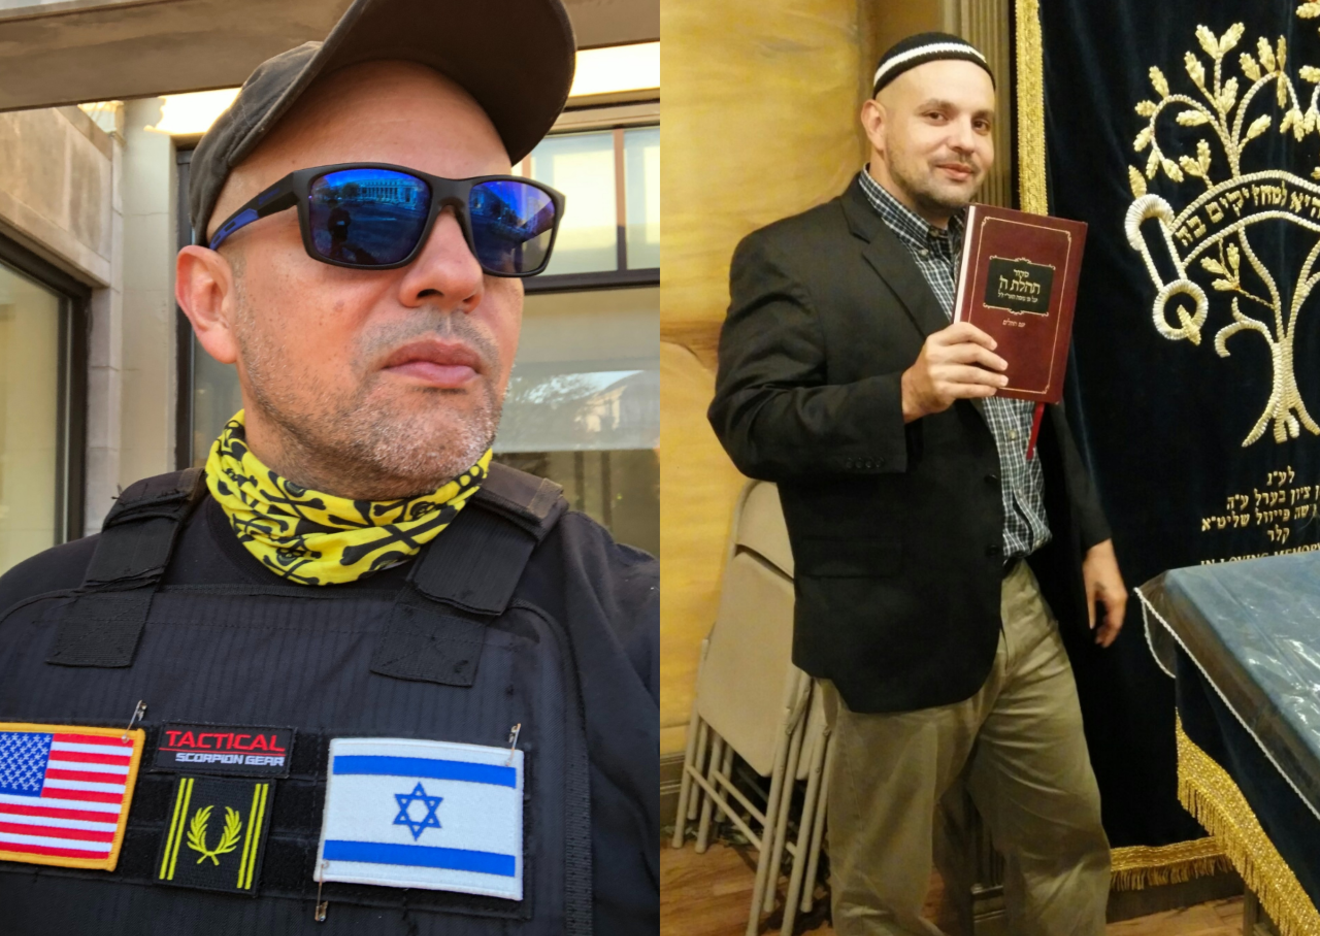 Asher Meza, the "Rabbi Proud Boy," offers religious exemptions to COVID-19 vaccine mandates to Jews and Gentiles on Telegram.